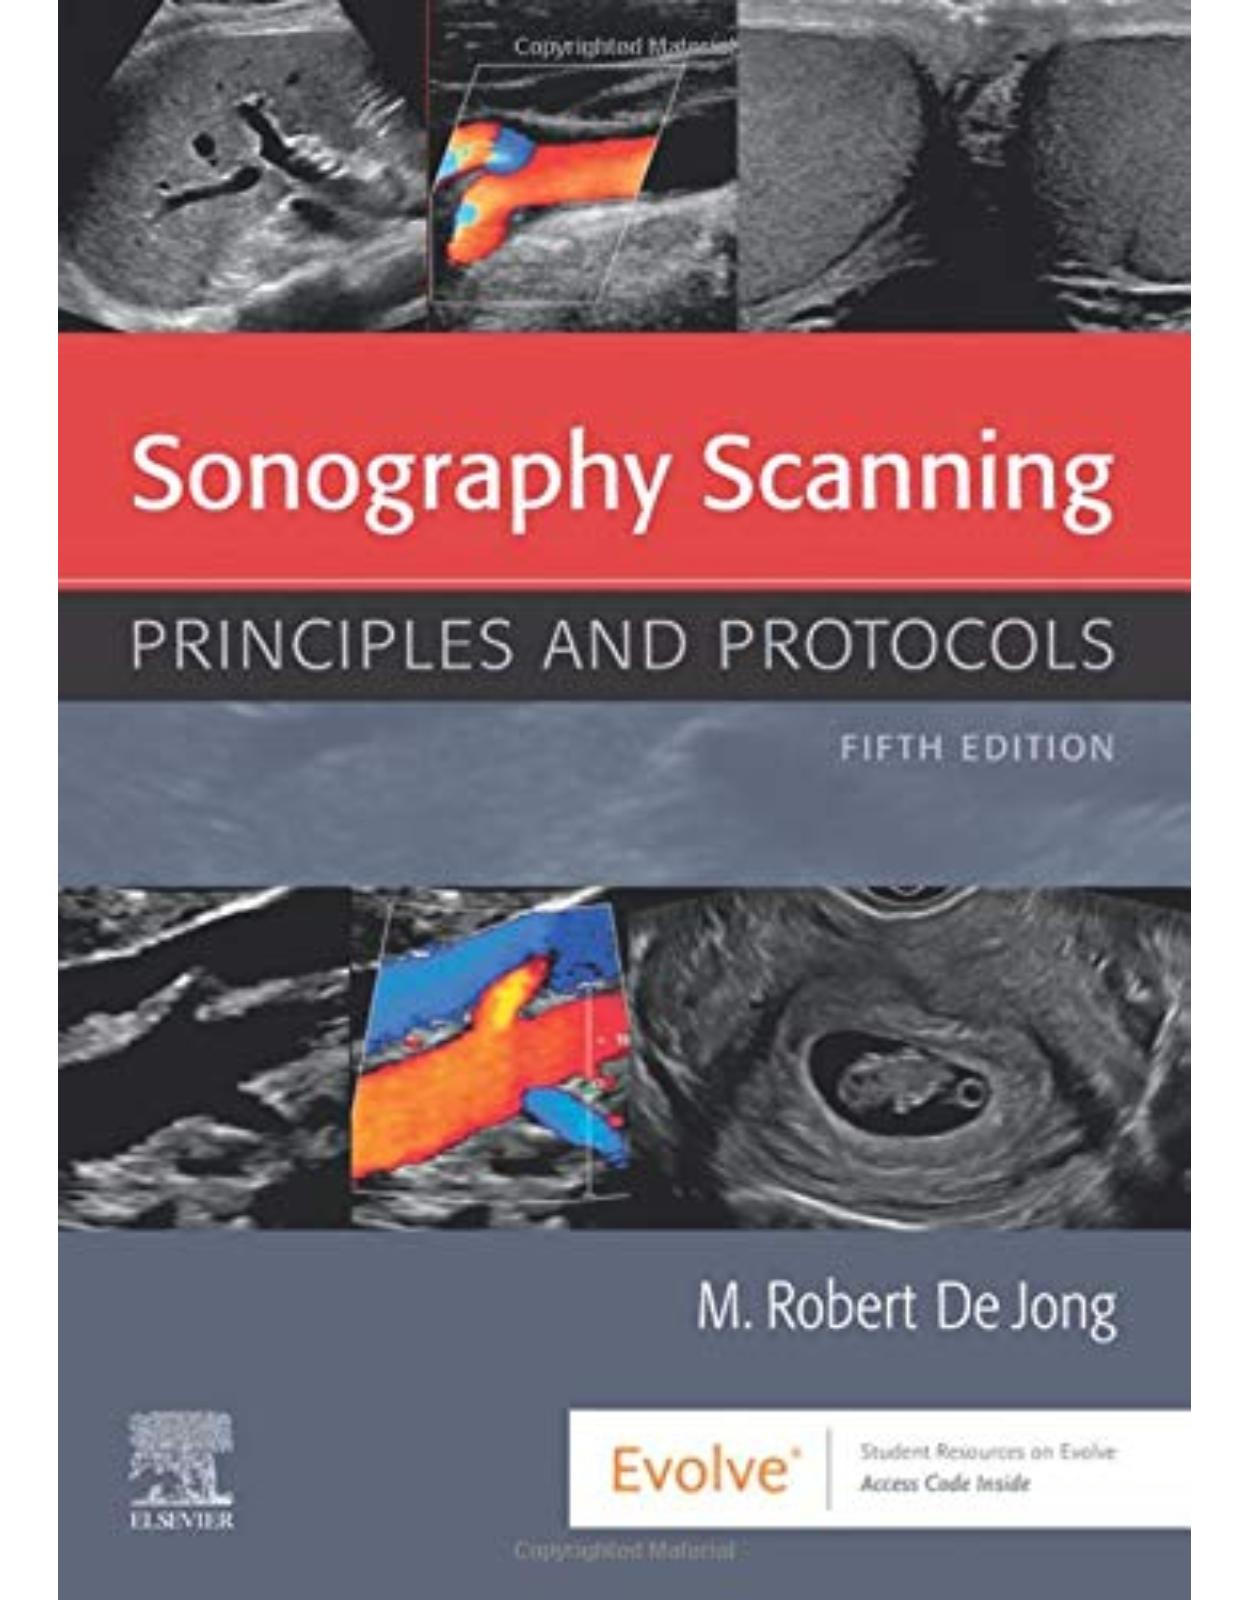 Sonography Scanning: Principles and Protocols 5 edition